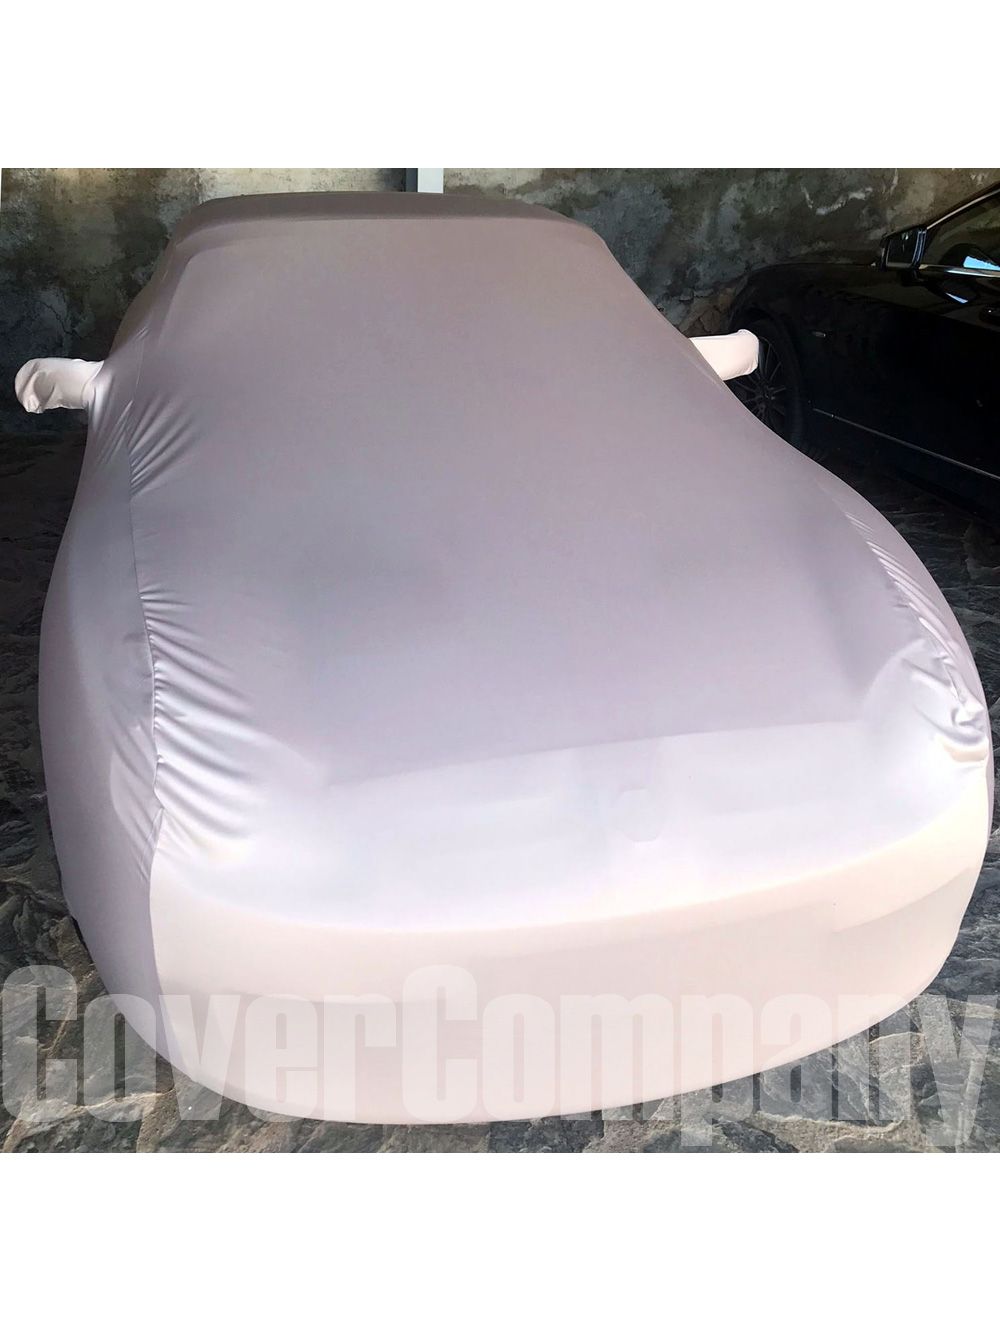 MG Custom Car Cover. Indoor Car Cover for MG